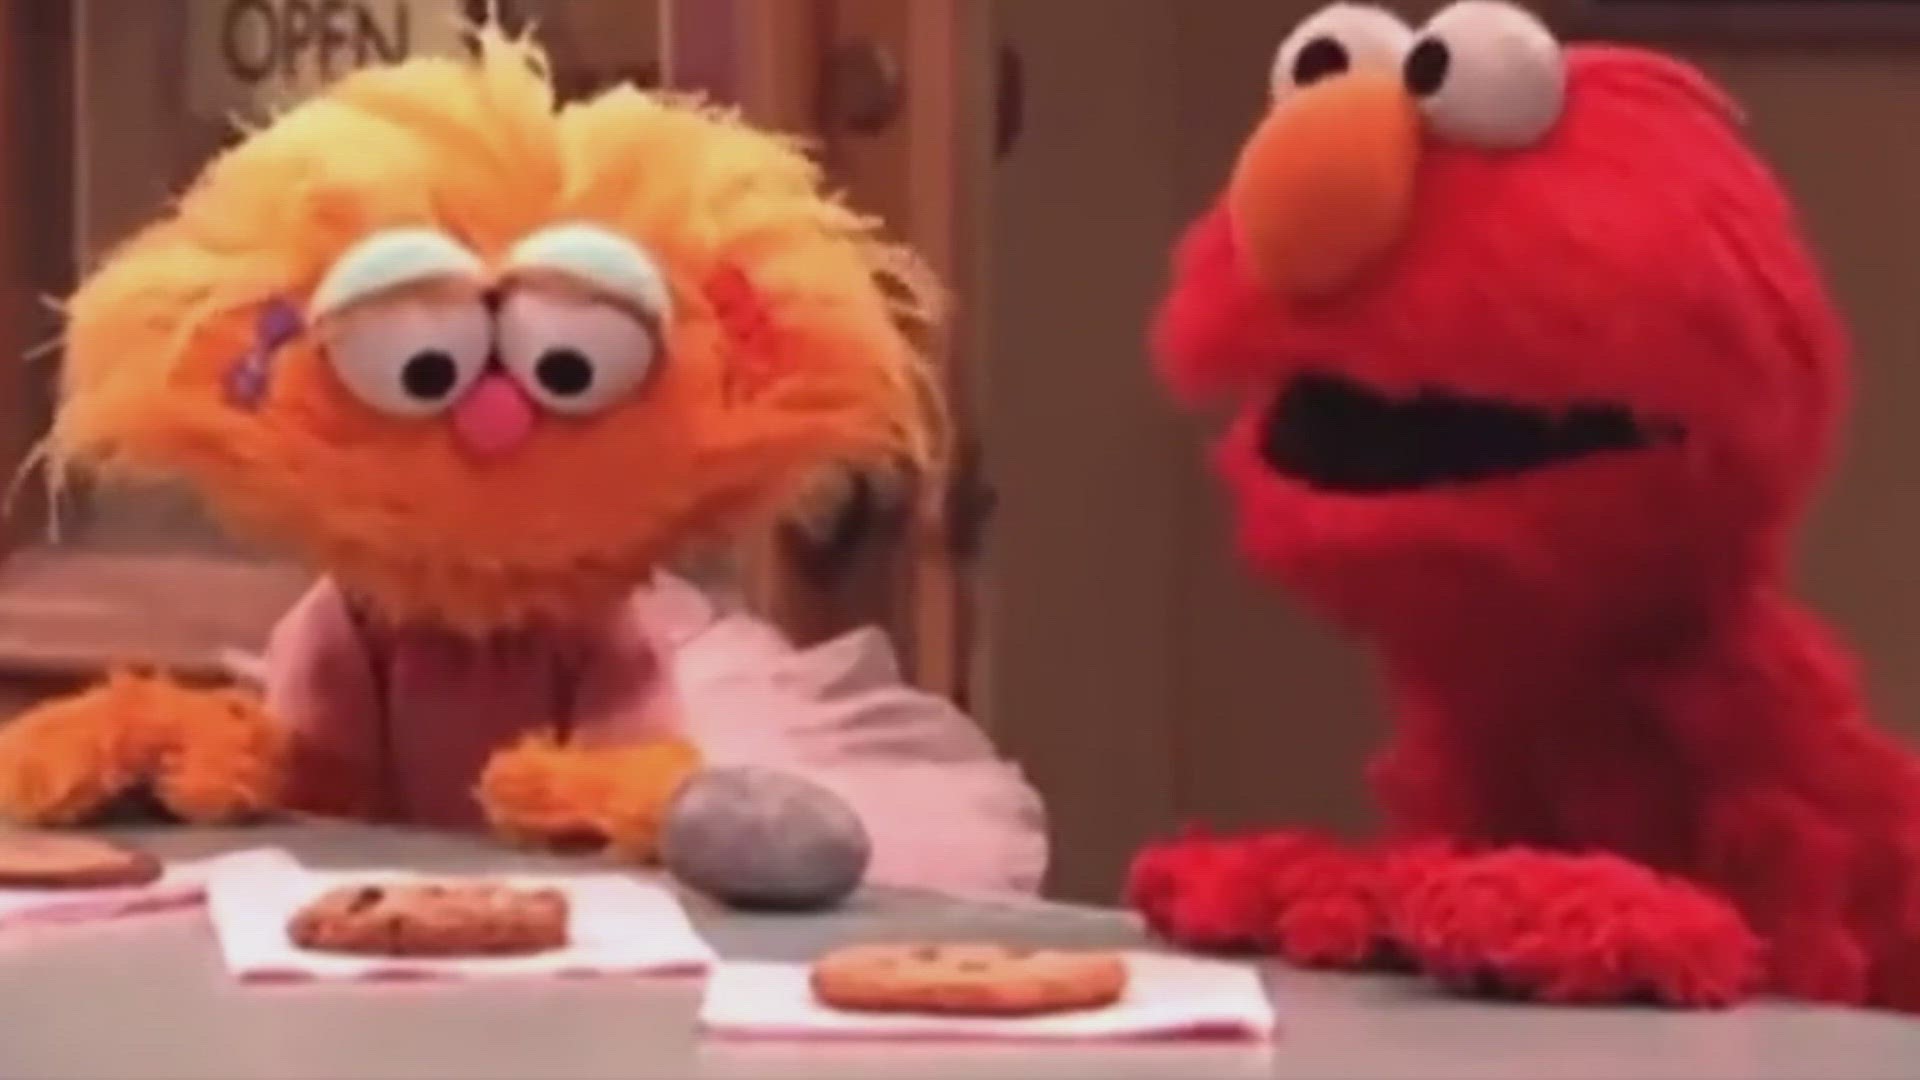 Sesame Street eventually stepped in and sent out a reminder about mental health resources.